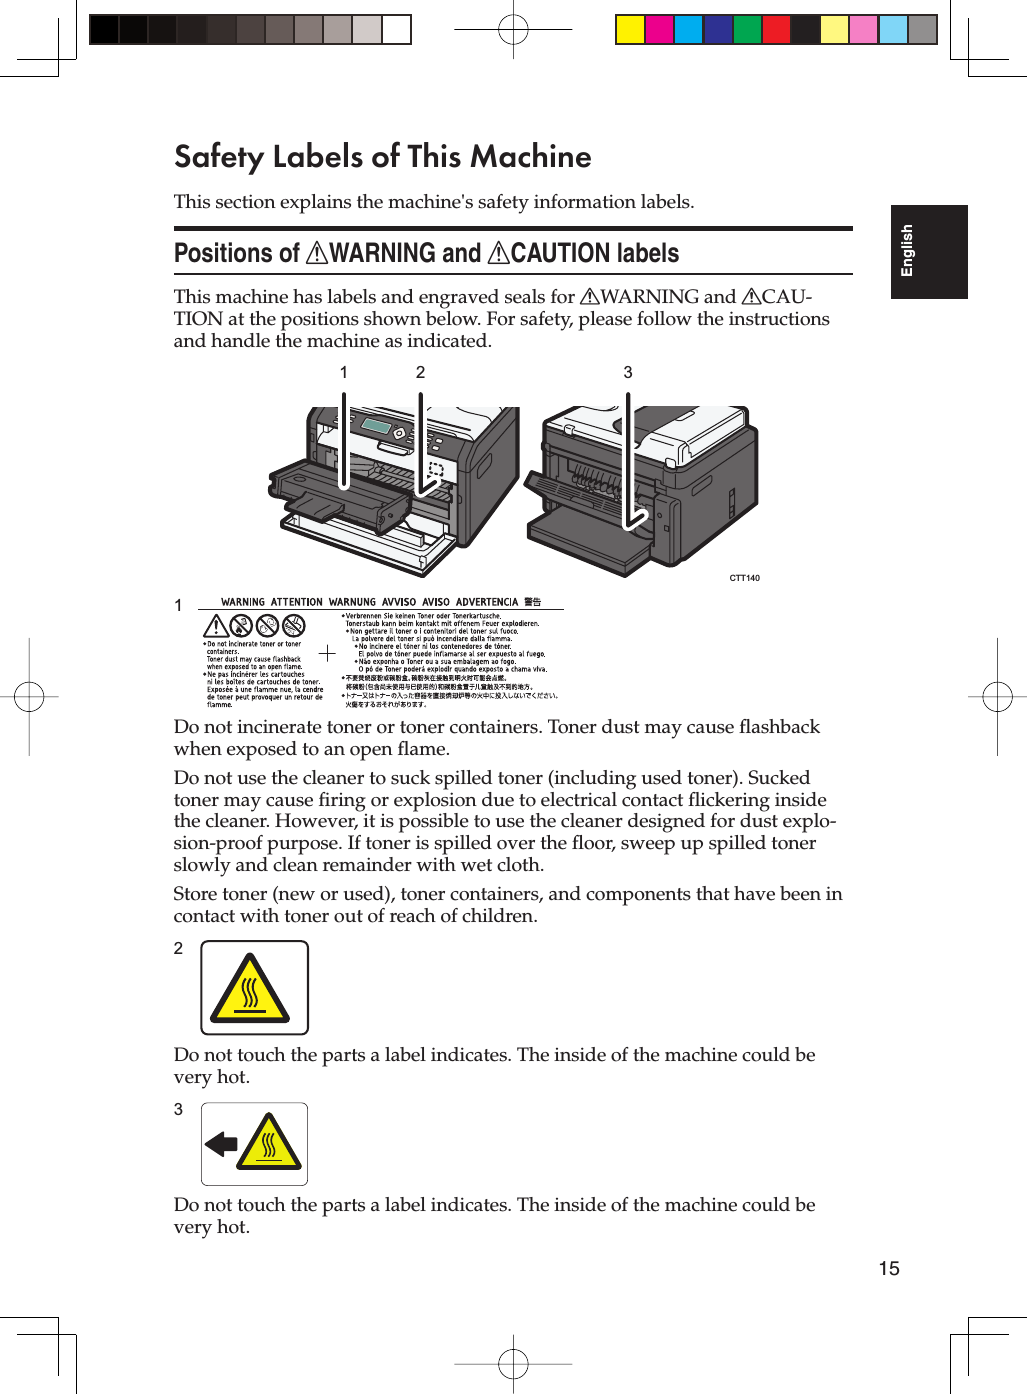 15EnglishSafety Labels of This MachineThis section explains the machine&apos;s safety information labels.Positions of RWARNING and RCAUTION labelsThis machine has labels and engraved seals for RWARNING and RCAU-TION at the positions shown below. For safety, please follow the instructions and handle the machine as indicated.1 2 3CTT1401Do not incinerate toner or toner containers. Toner dust may cause flashback when exposed to an open flame.Do not use the cleaner to suck spilled toner (including used toner). Sucked toner may cause firing or explosion due to electrical contact flickering inside the cleaner. However, it is possible to use the cleaner designed for dust explo-sion-proof purpose. If toner is spilled over the floor, sweep up spilled toner slowly and clean remainder with wet cloth.Store toner (new or used), toner containers, and components that have been in contact with toner out of reach of children.2Do not touch the parts a label indicates. The inside of the machine could be very hot.3Do not touch the parts a label indicates. The inside of the machine could be very hot.